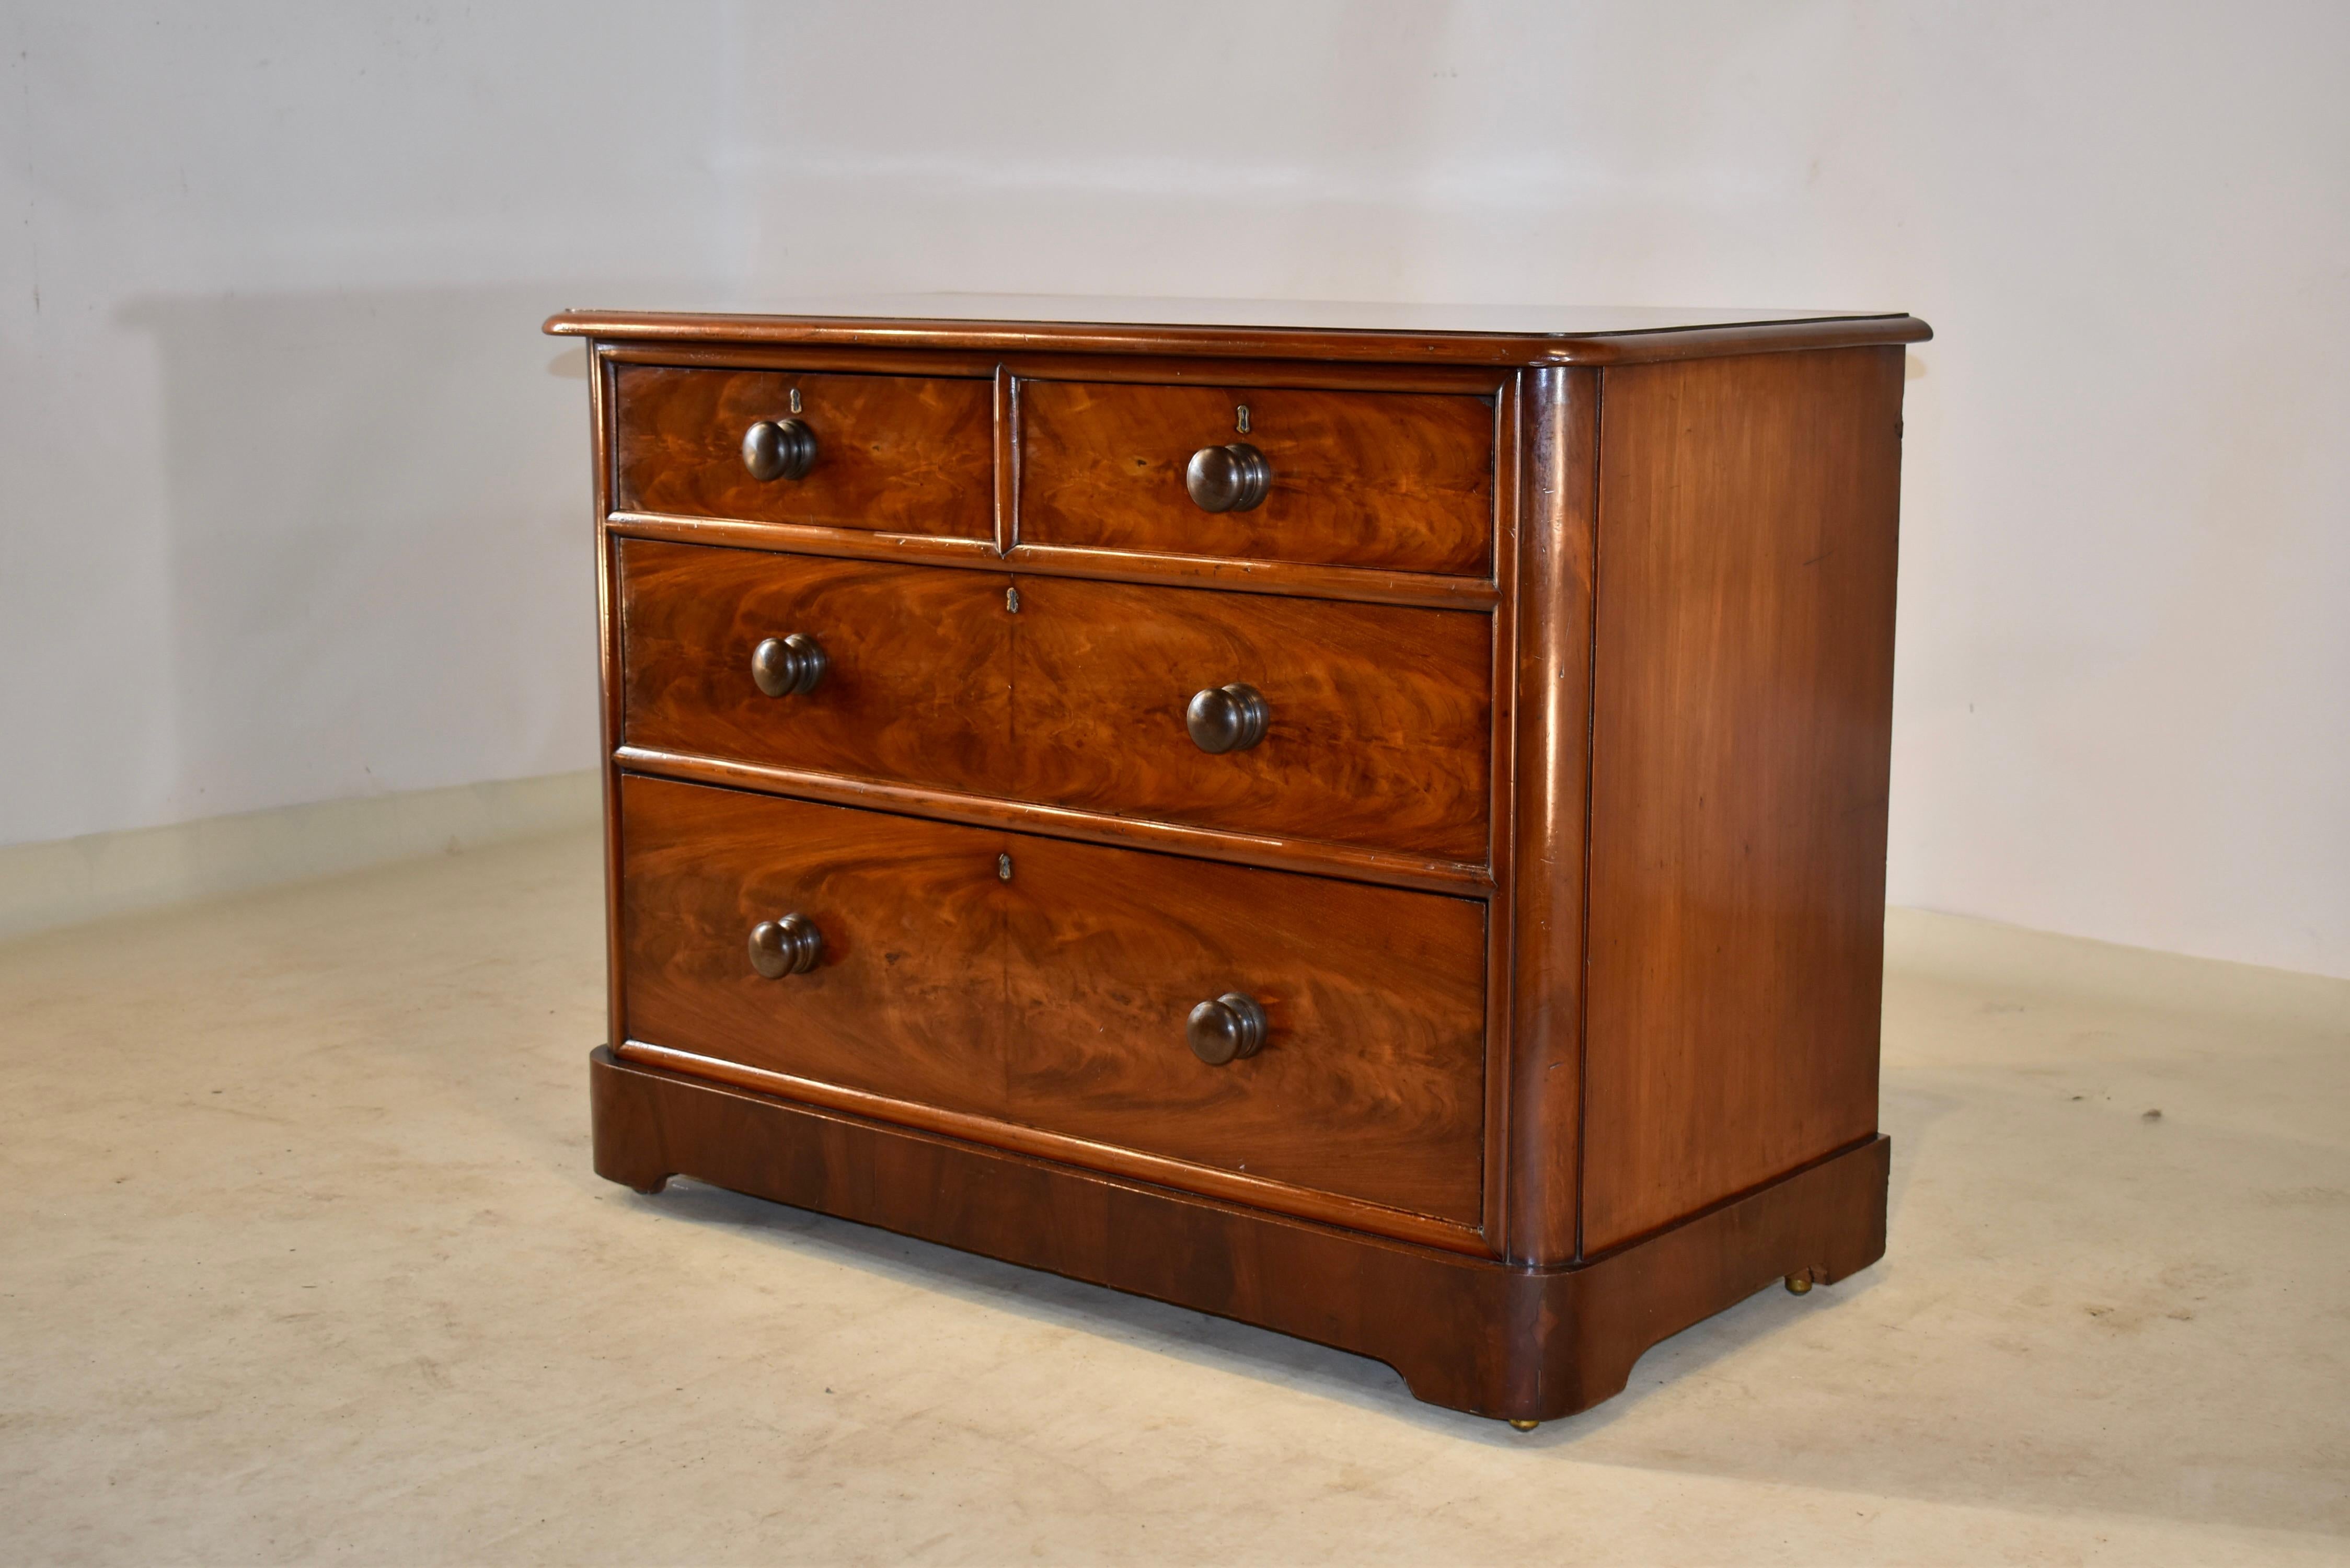 19th Century English Chest of Drawers In Good Condition For Sale In High Point, NC